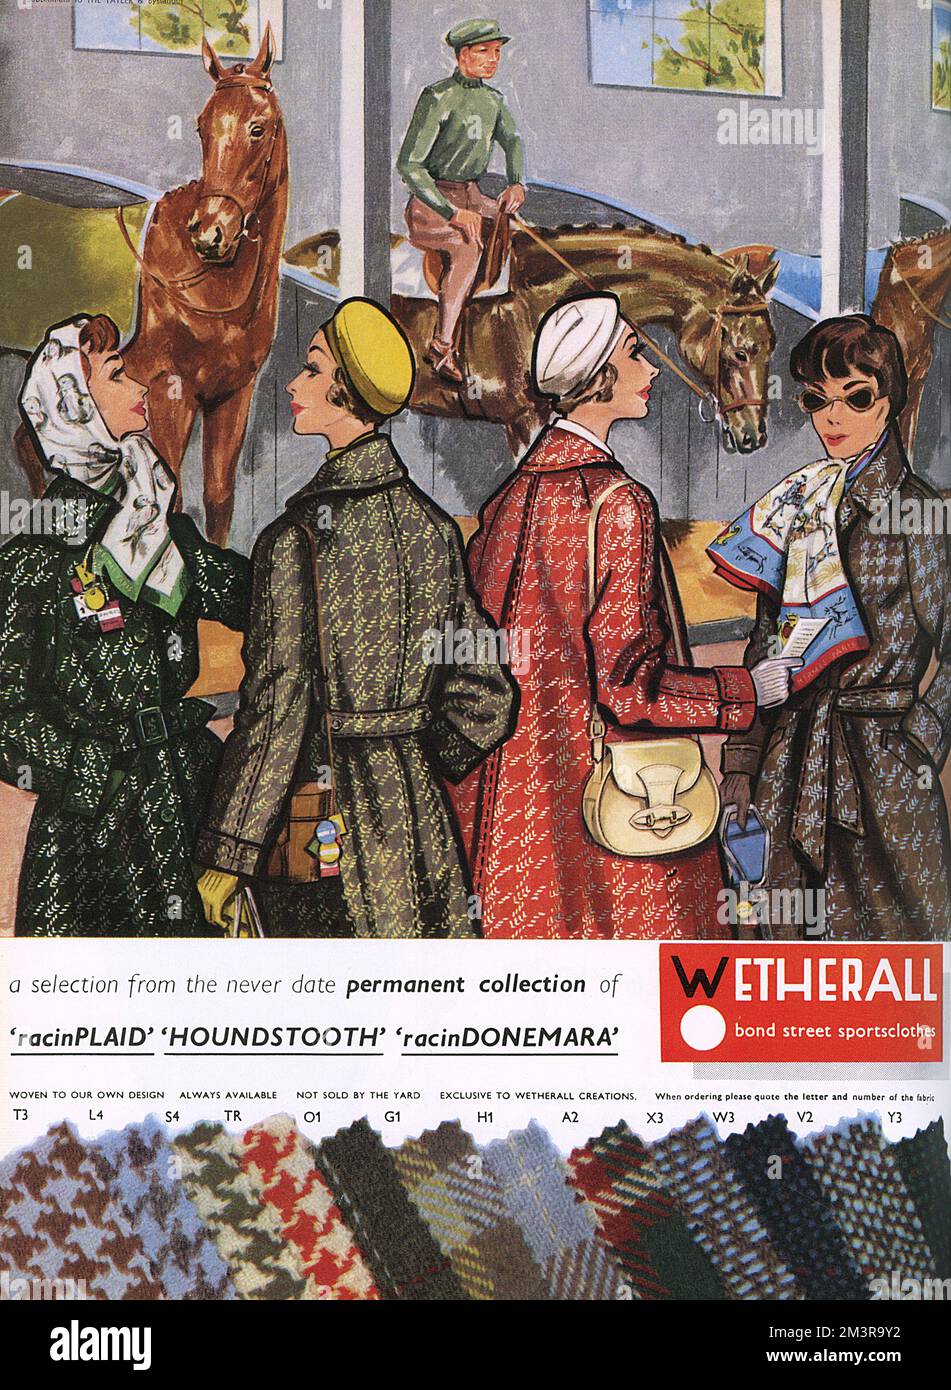 Advertisement for Wetherall coats in a variety of houndstooth and plaid patterns - just the thing to ensure elegance on a rainy day at the races.     Date: 1959 Stock Photo